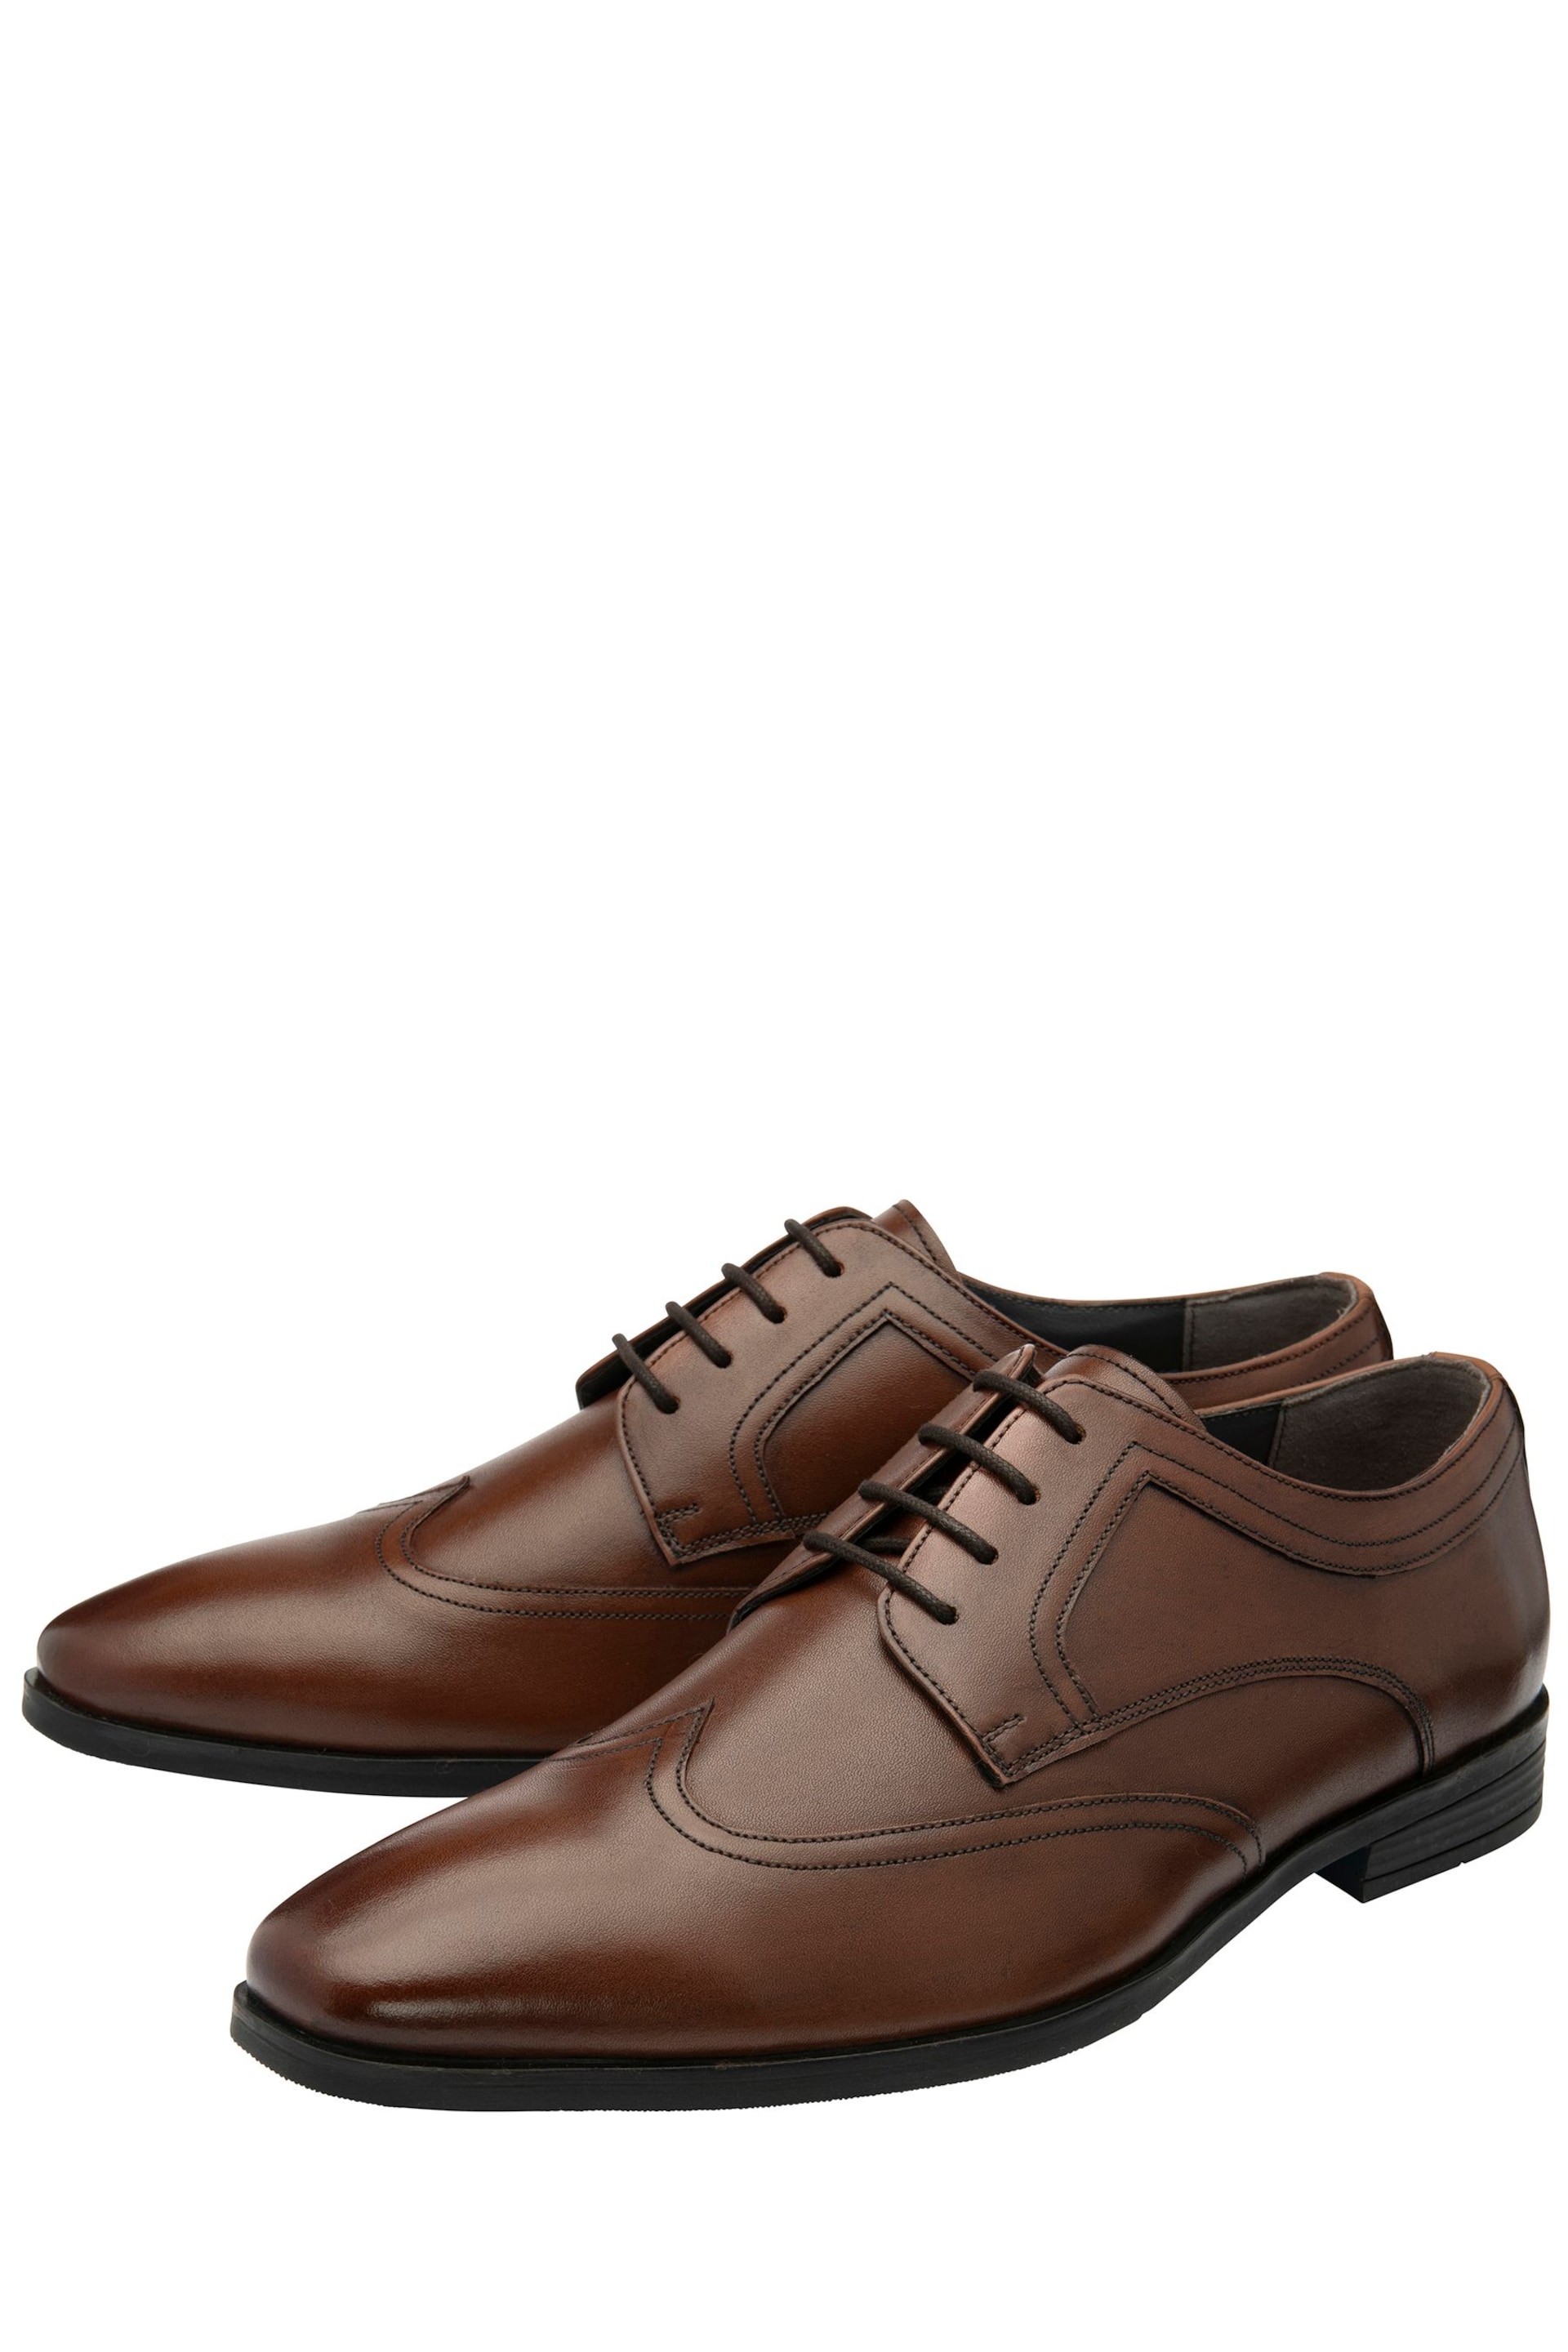 Frank Wright Brown Suede Lace-Up Derby Mens Shoes - Image 2 of 4